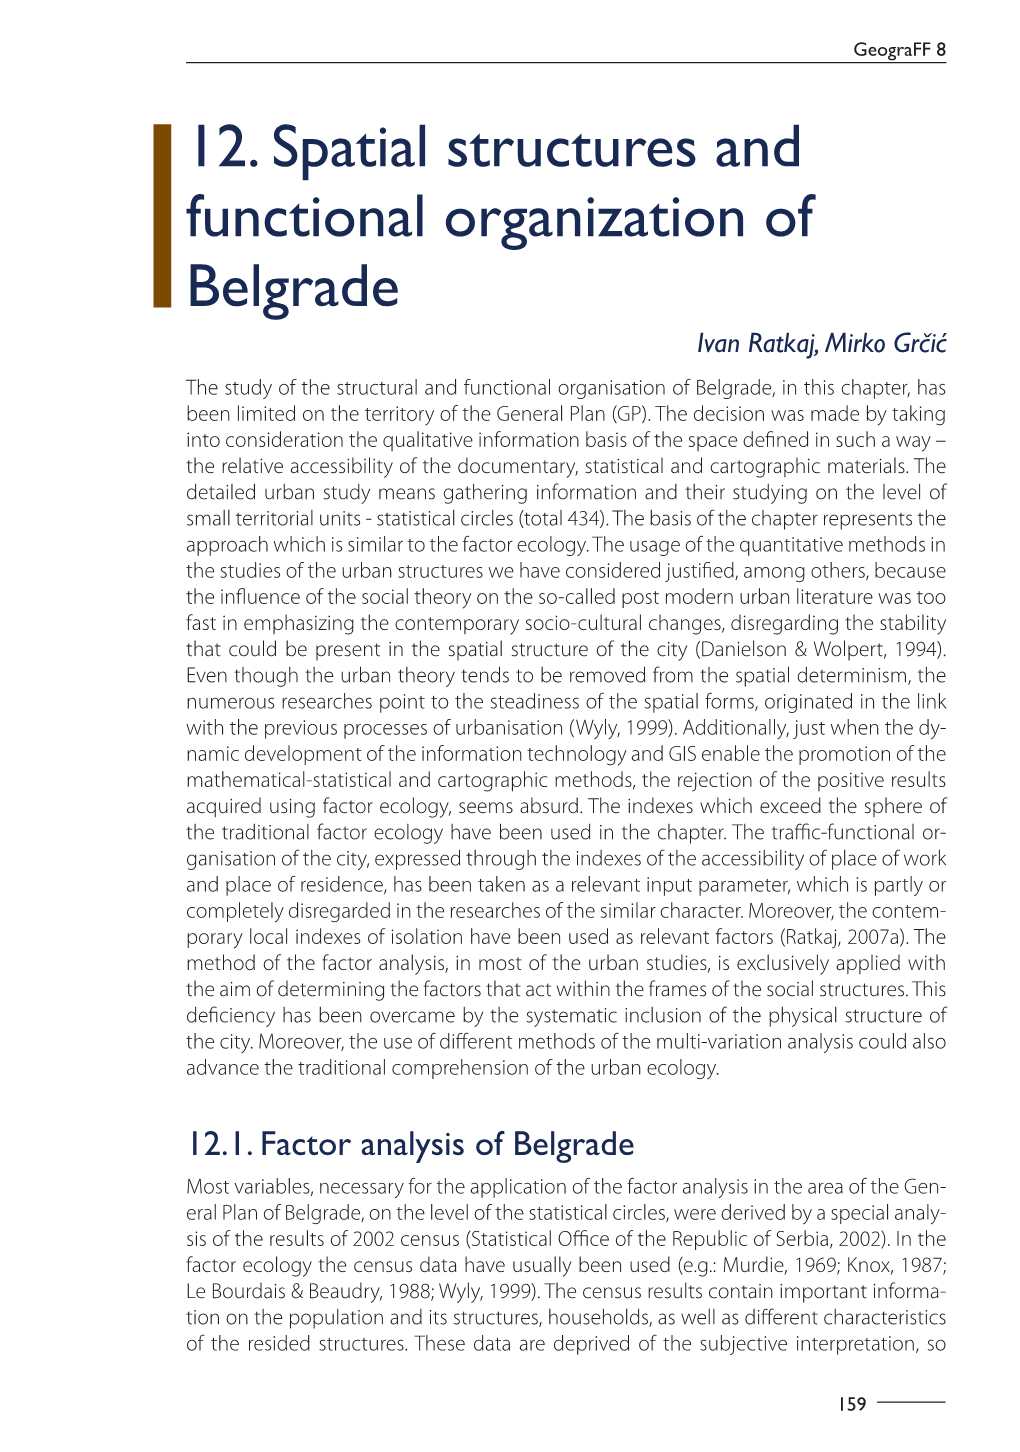 12. Spatial Structures and Functional Organization of Belgrade